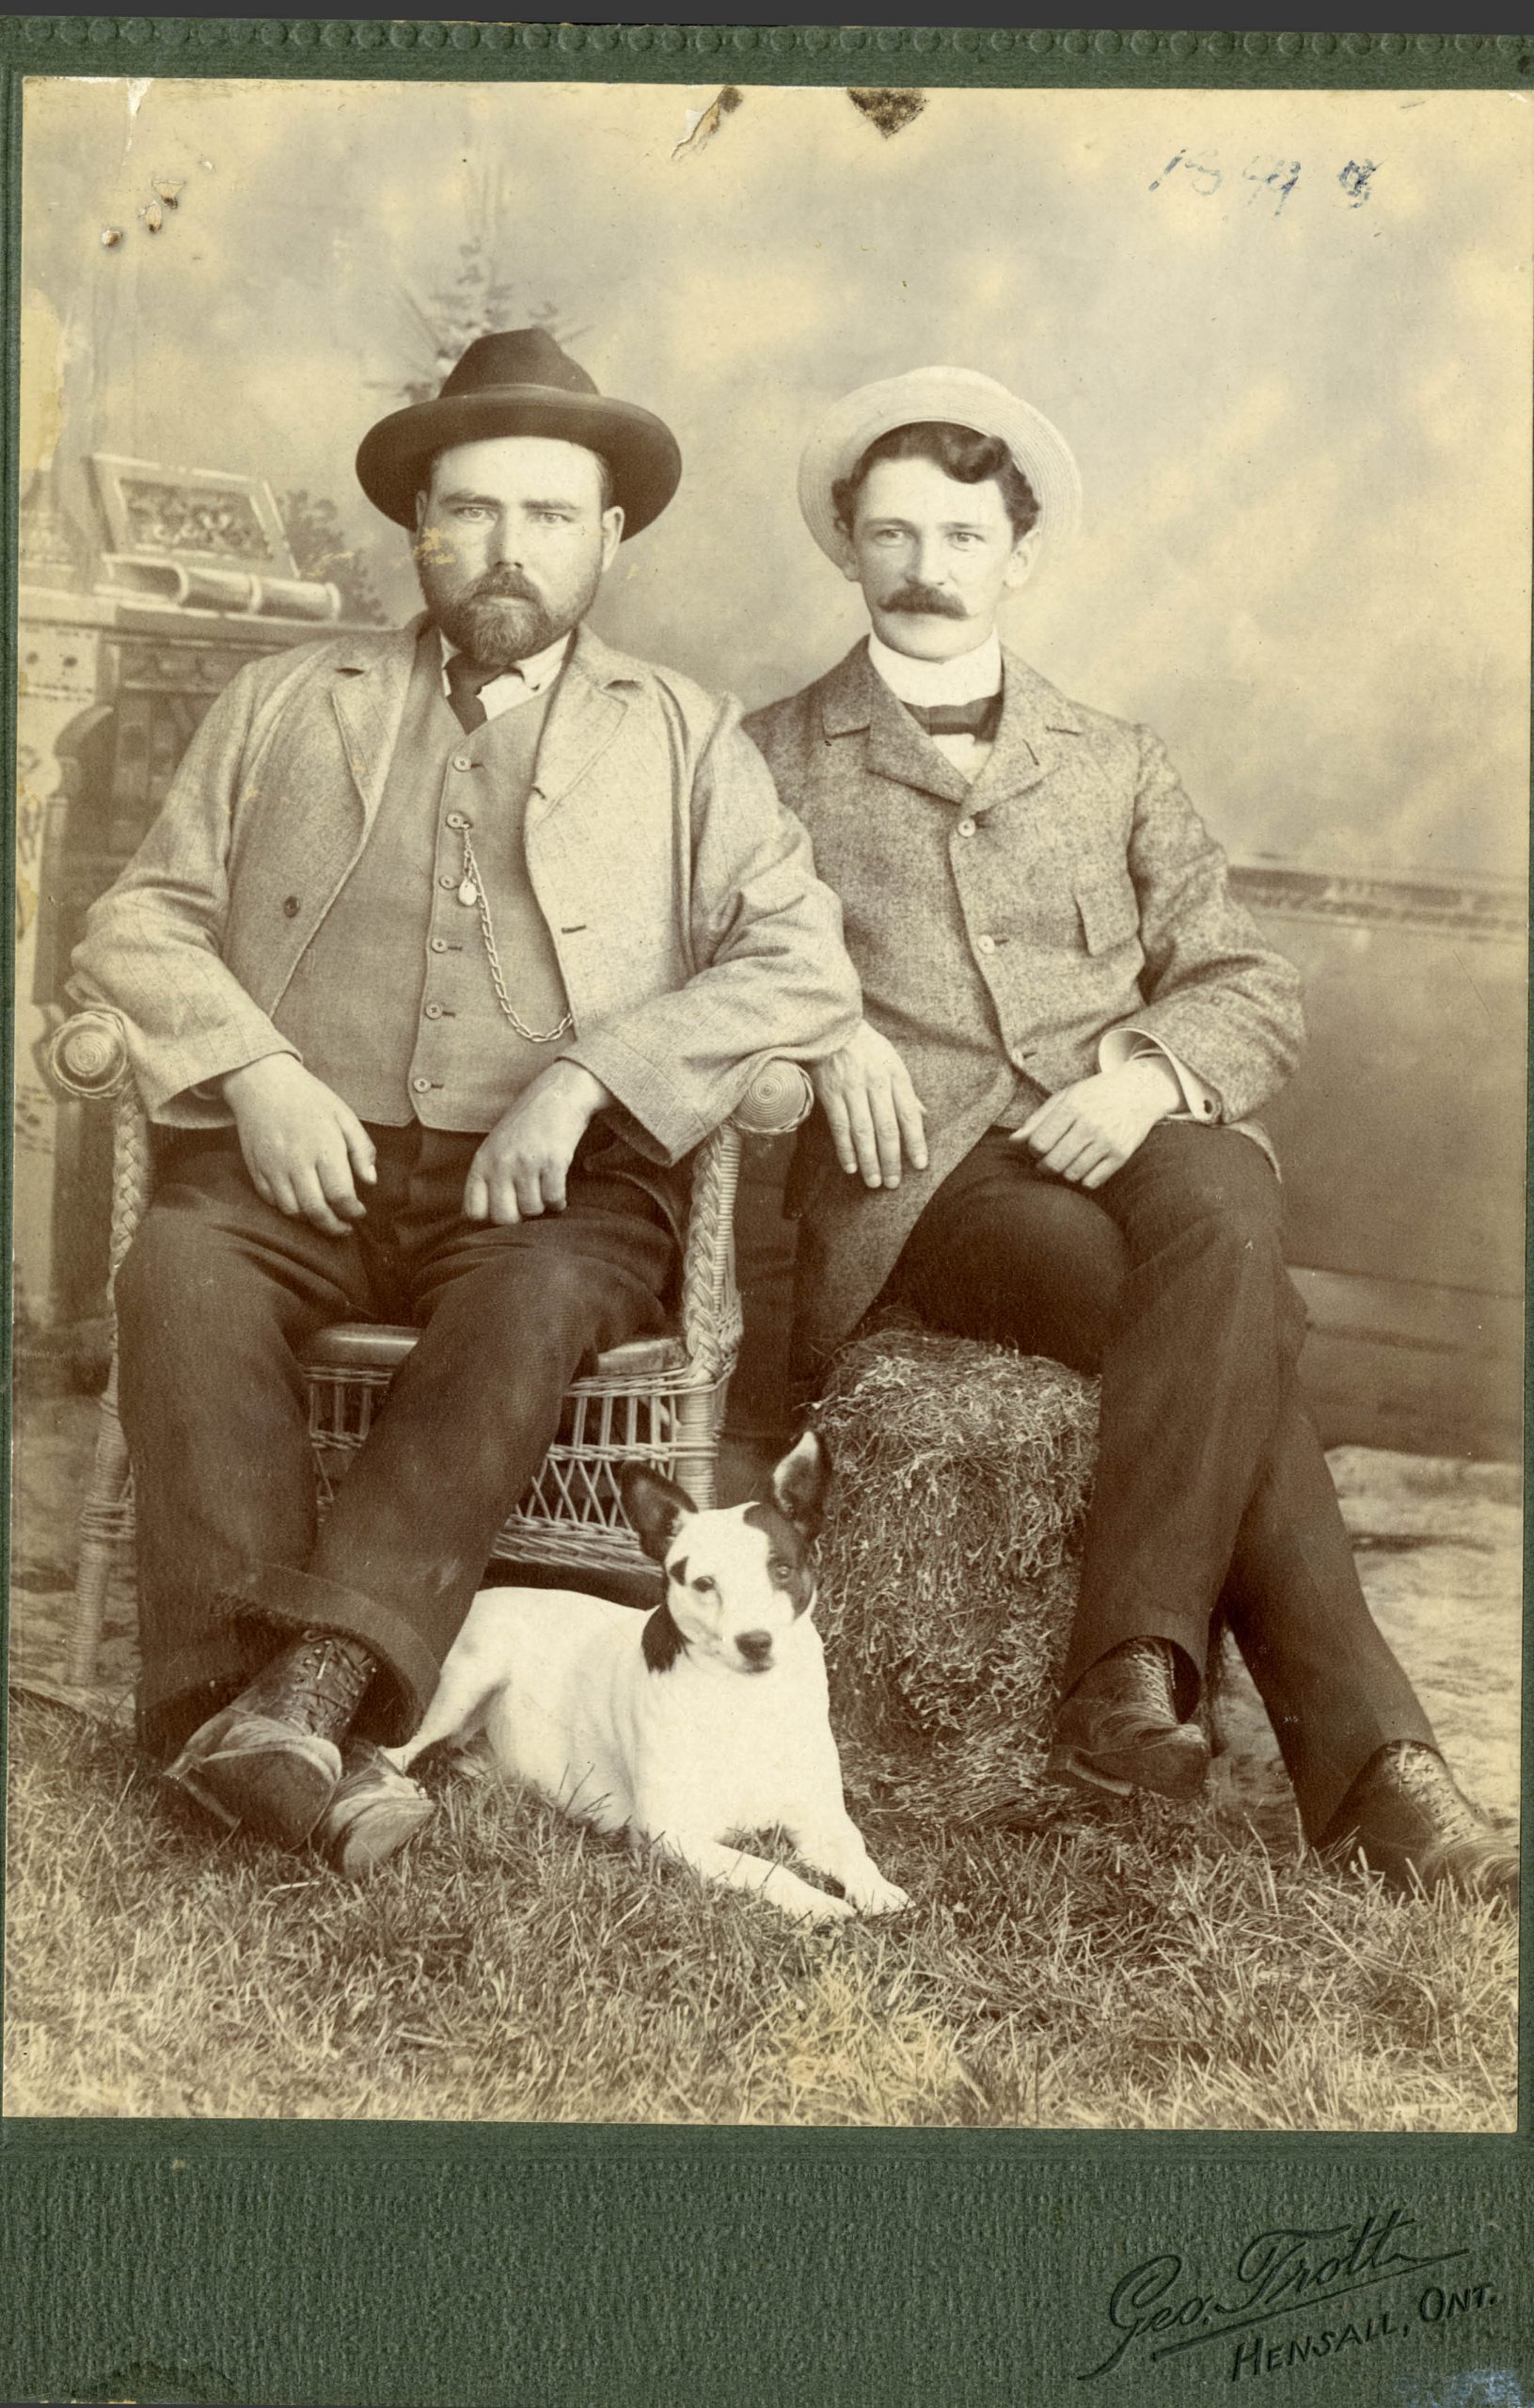 Historic image of two men with a dog